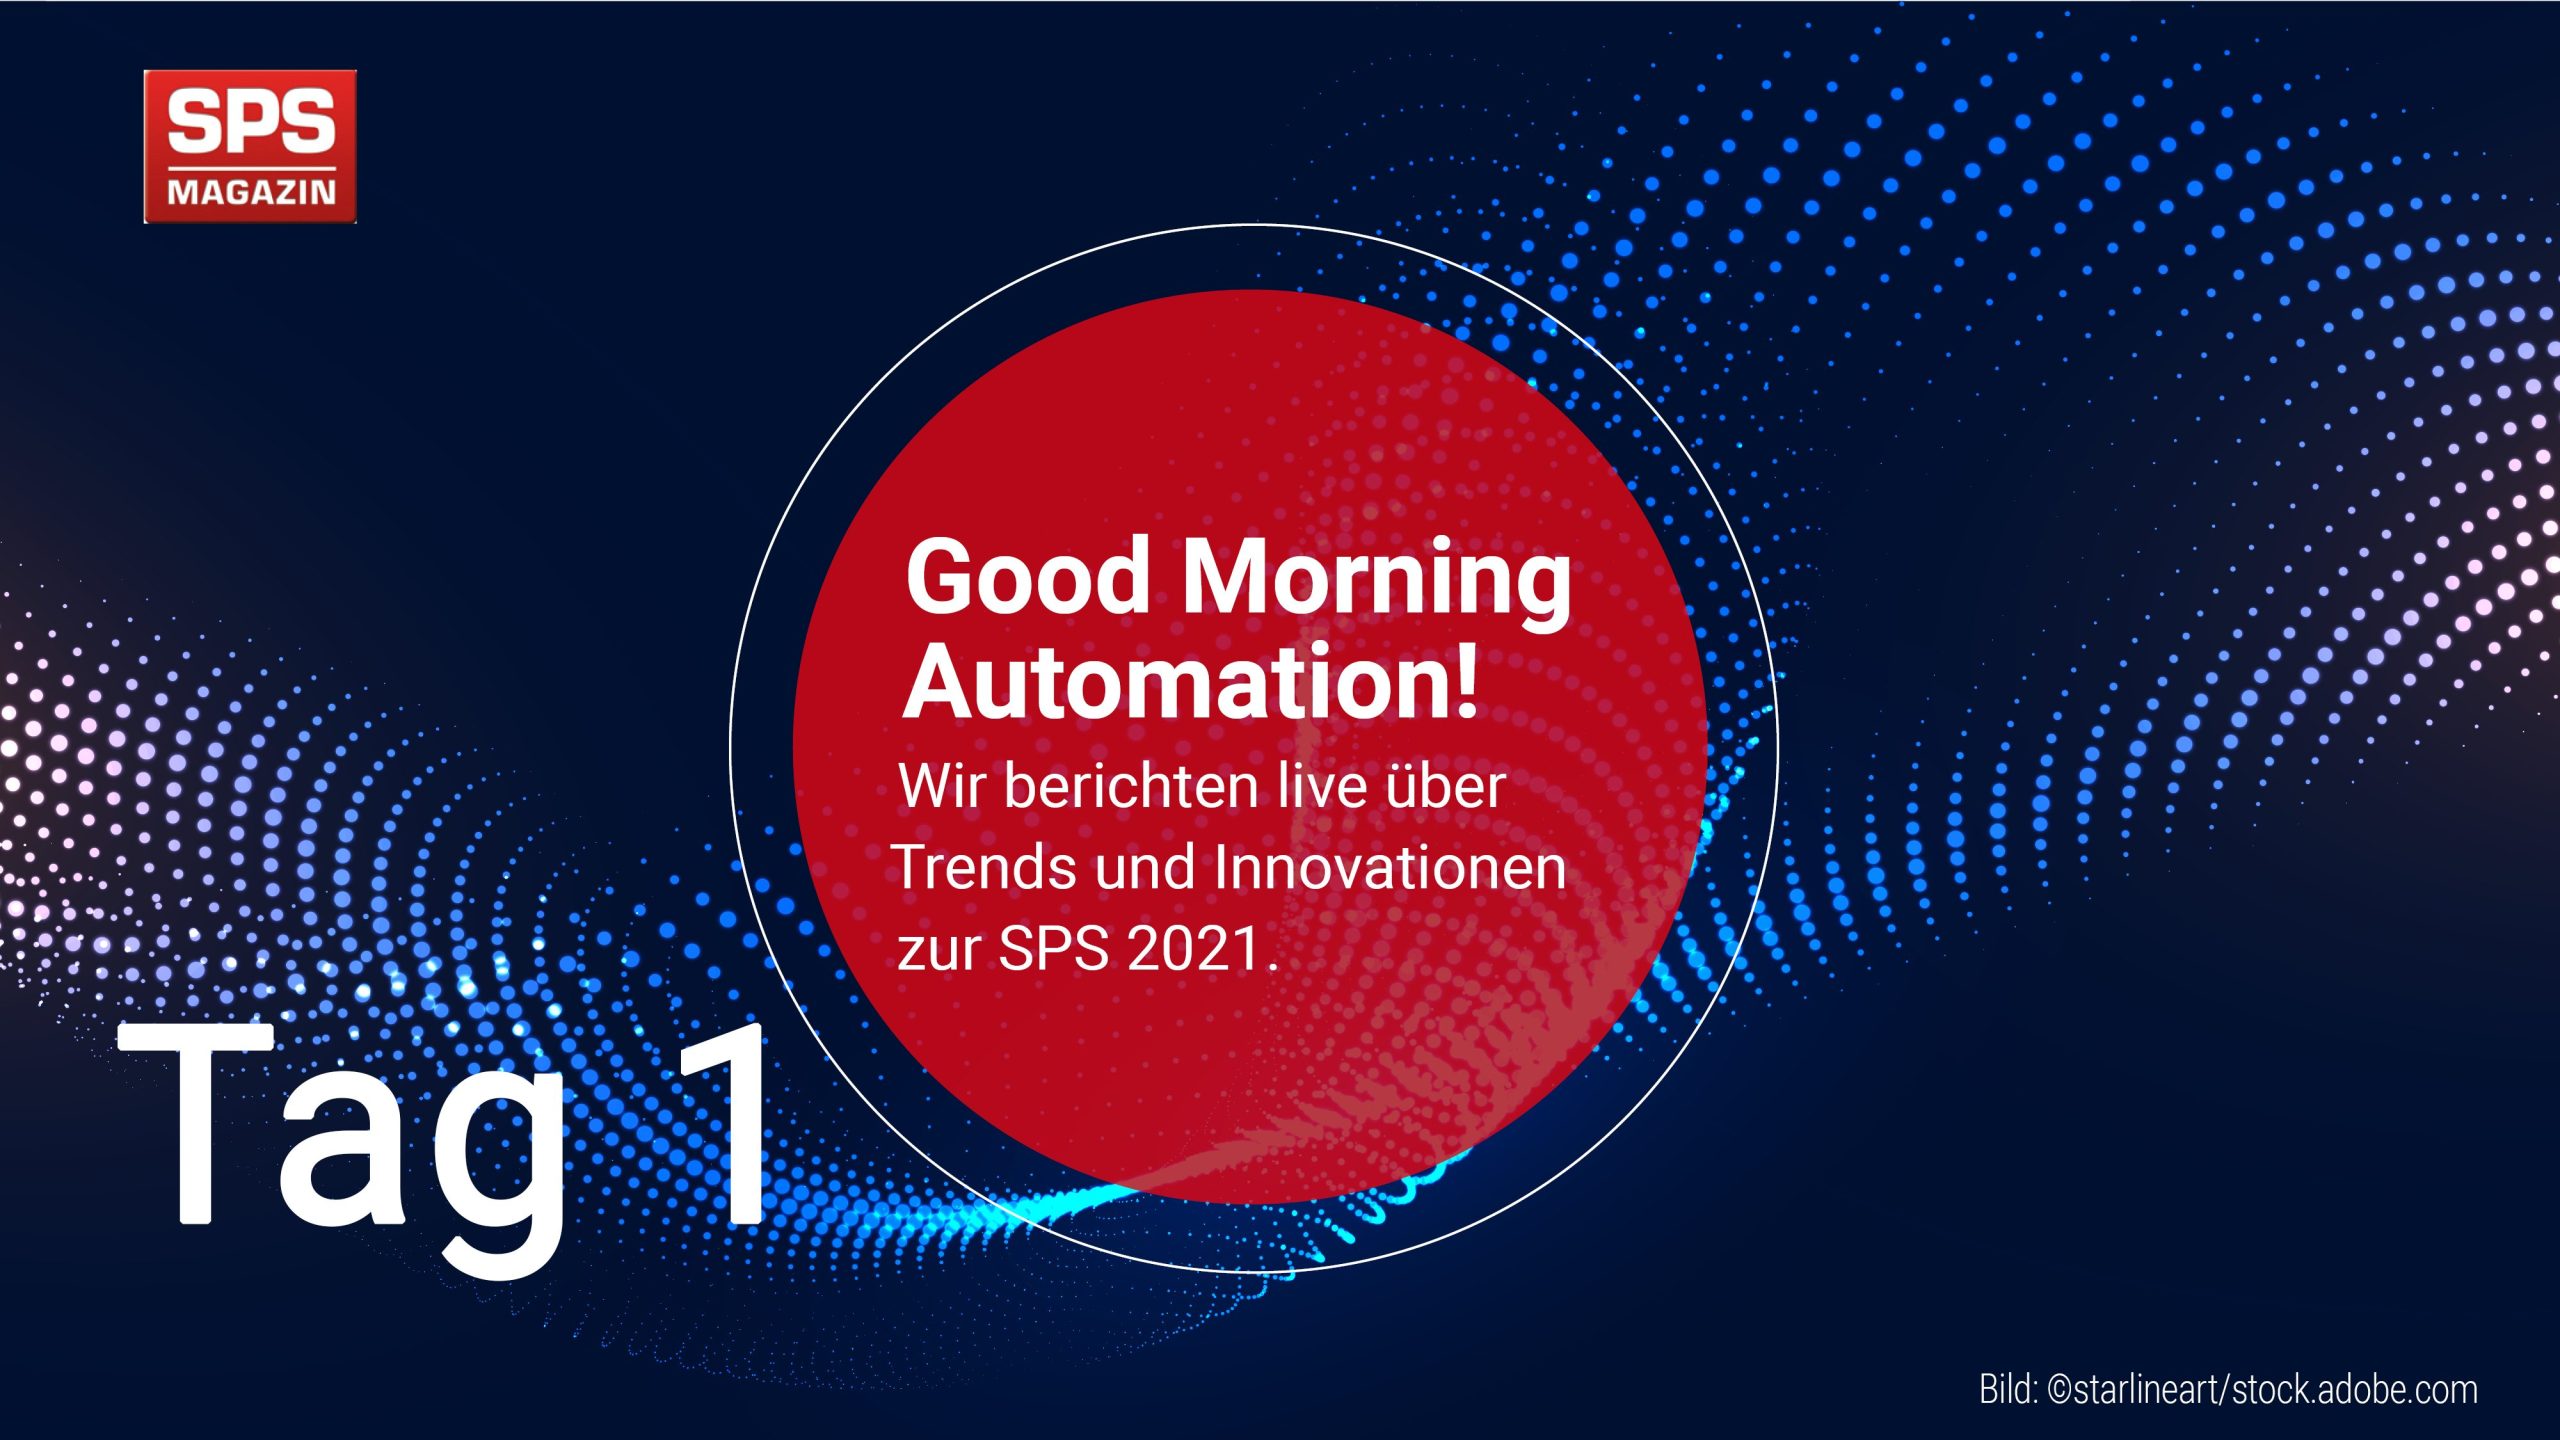 GOOD MORNING AUTOMATION – Tag 1